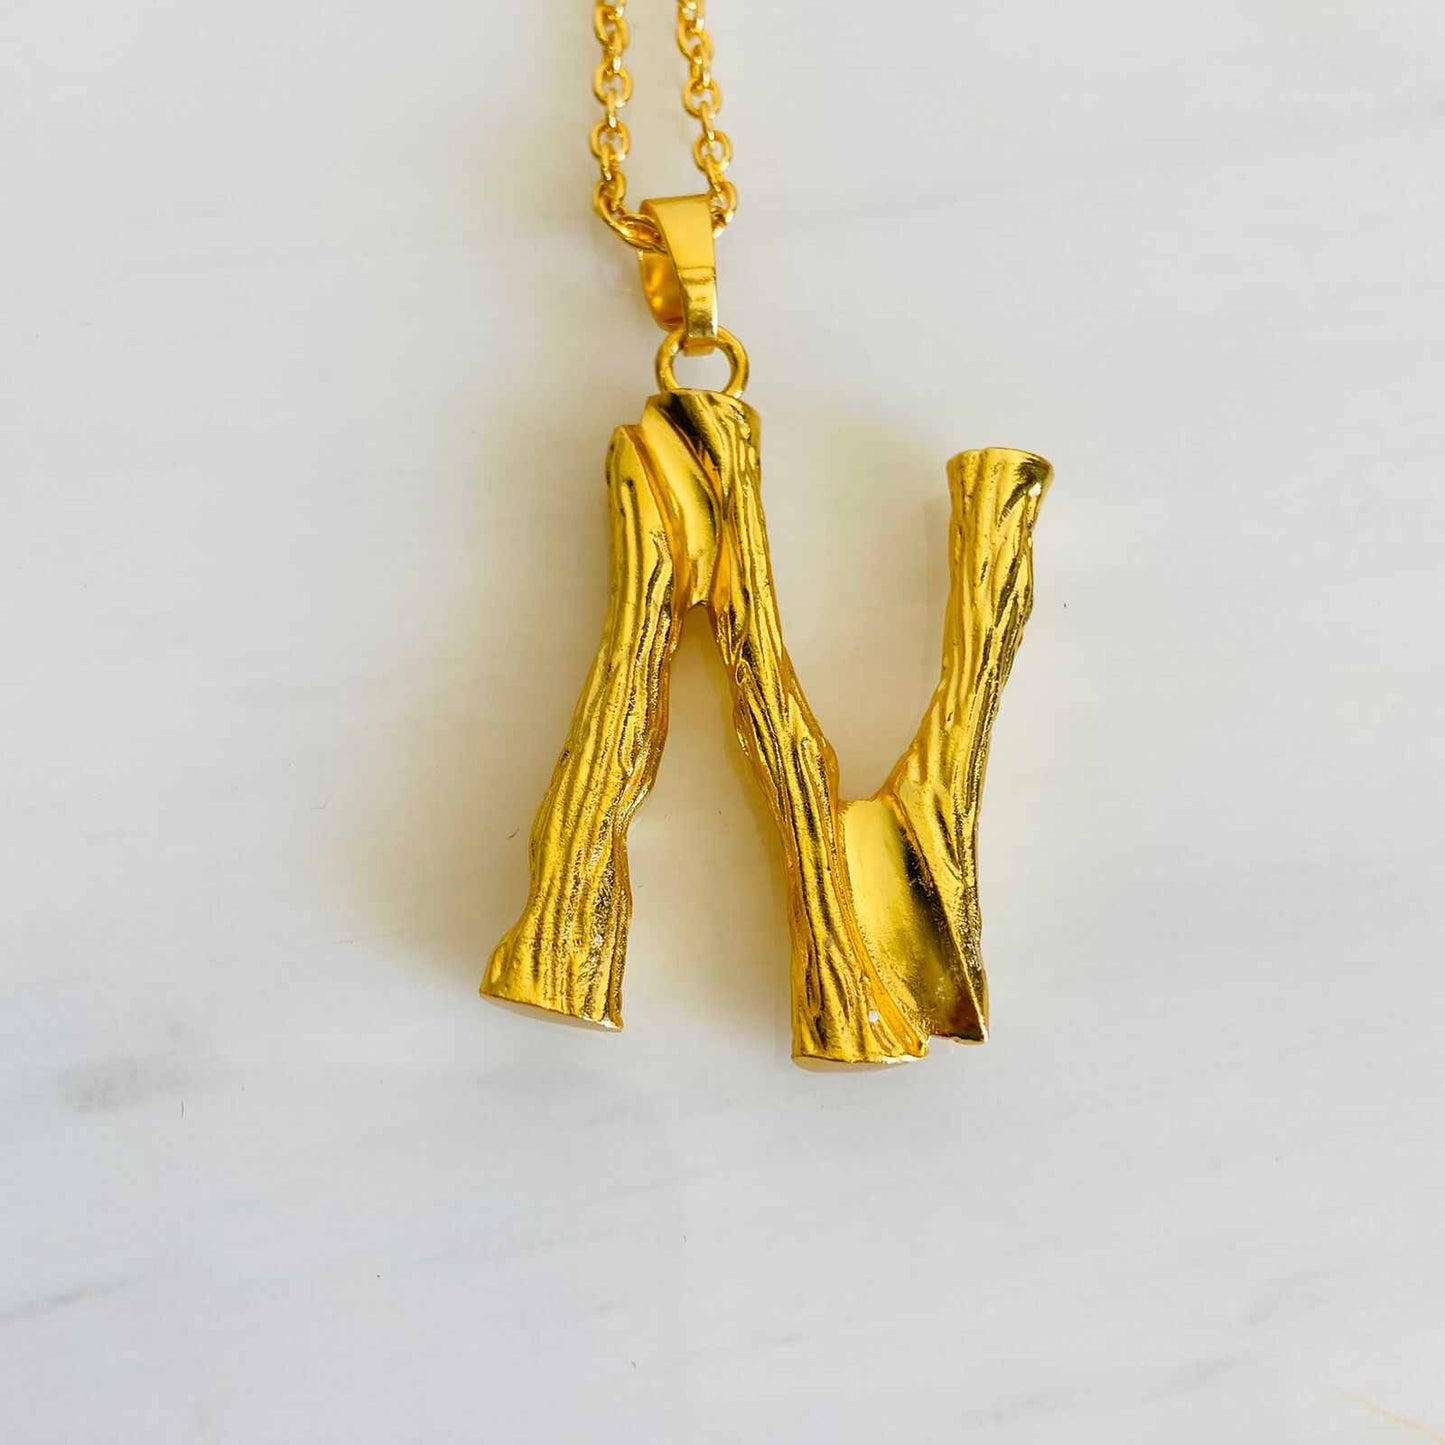 ALPHABET N BRACELET IN BRASS WITH GOLD FINISH - GOLD